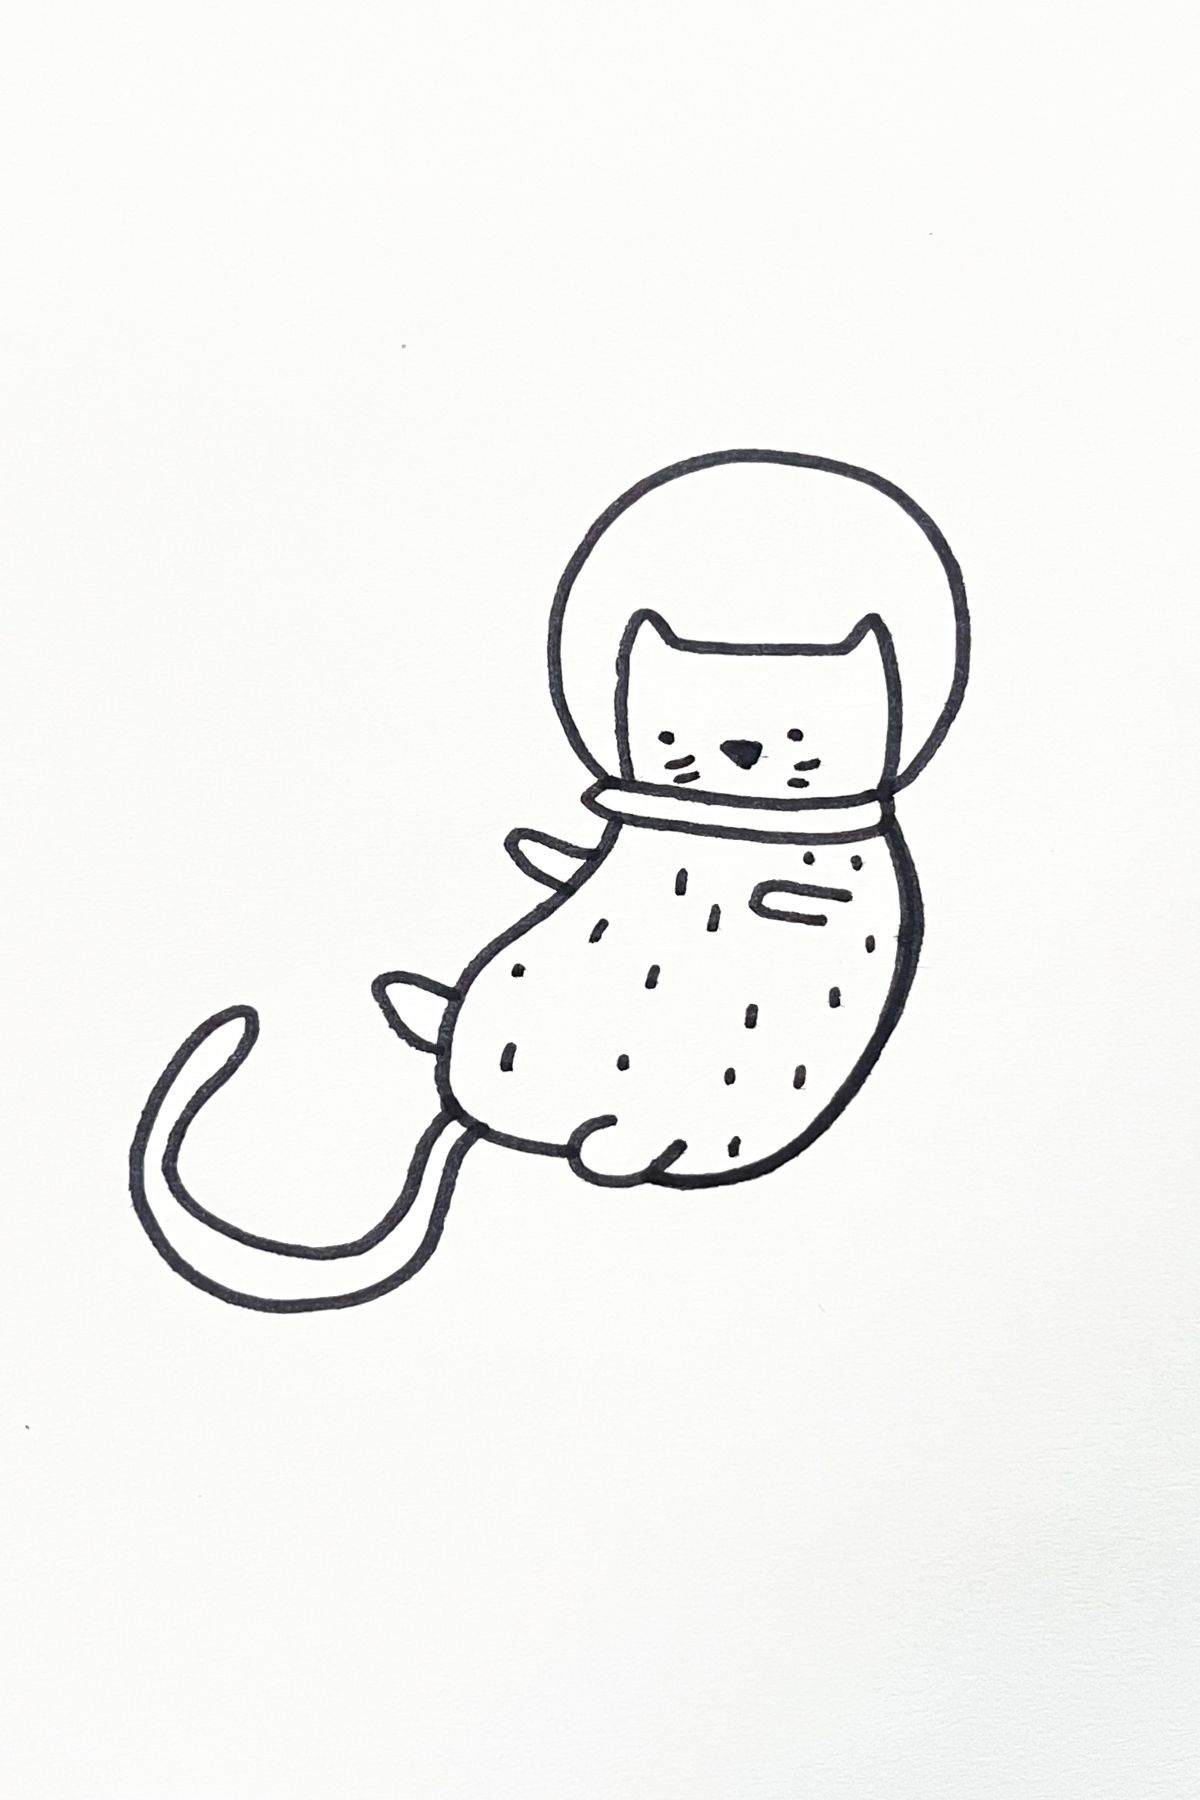 space cat drawing idea